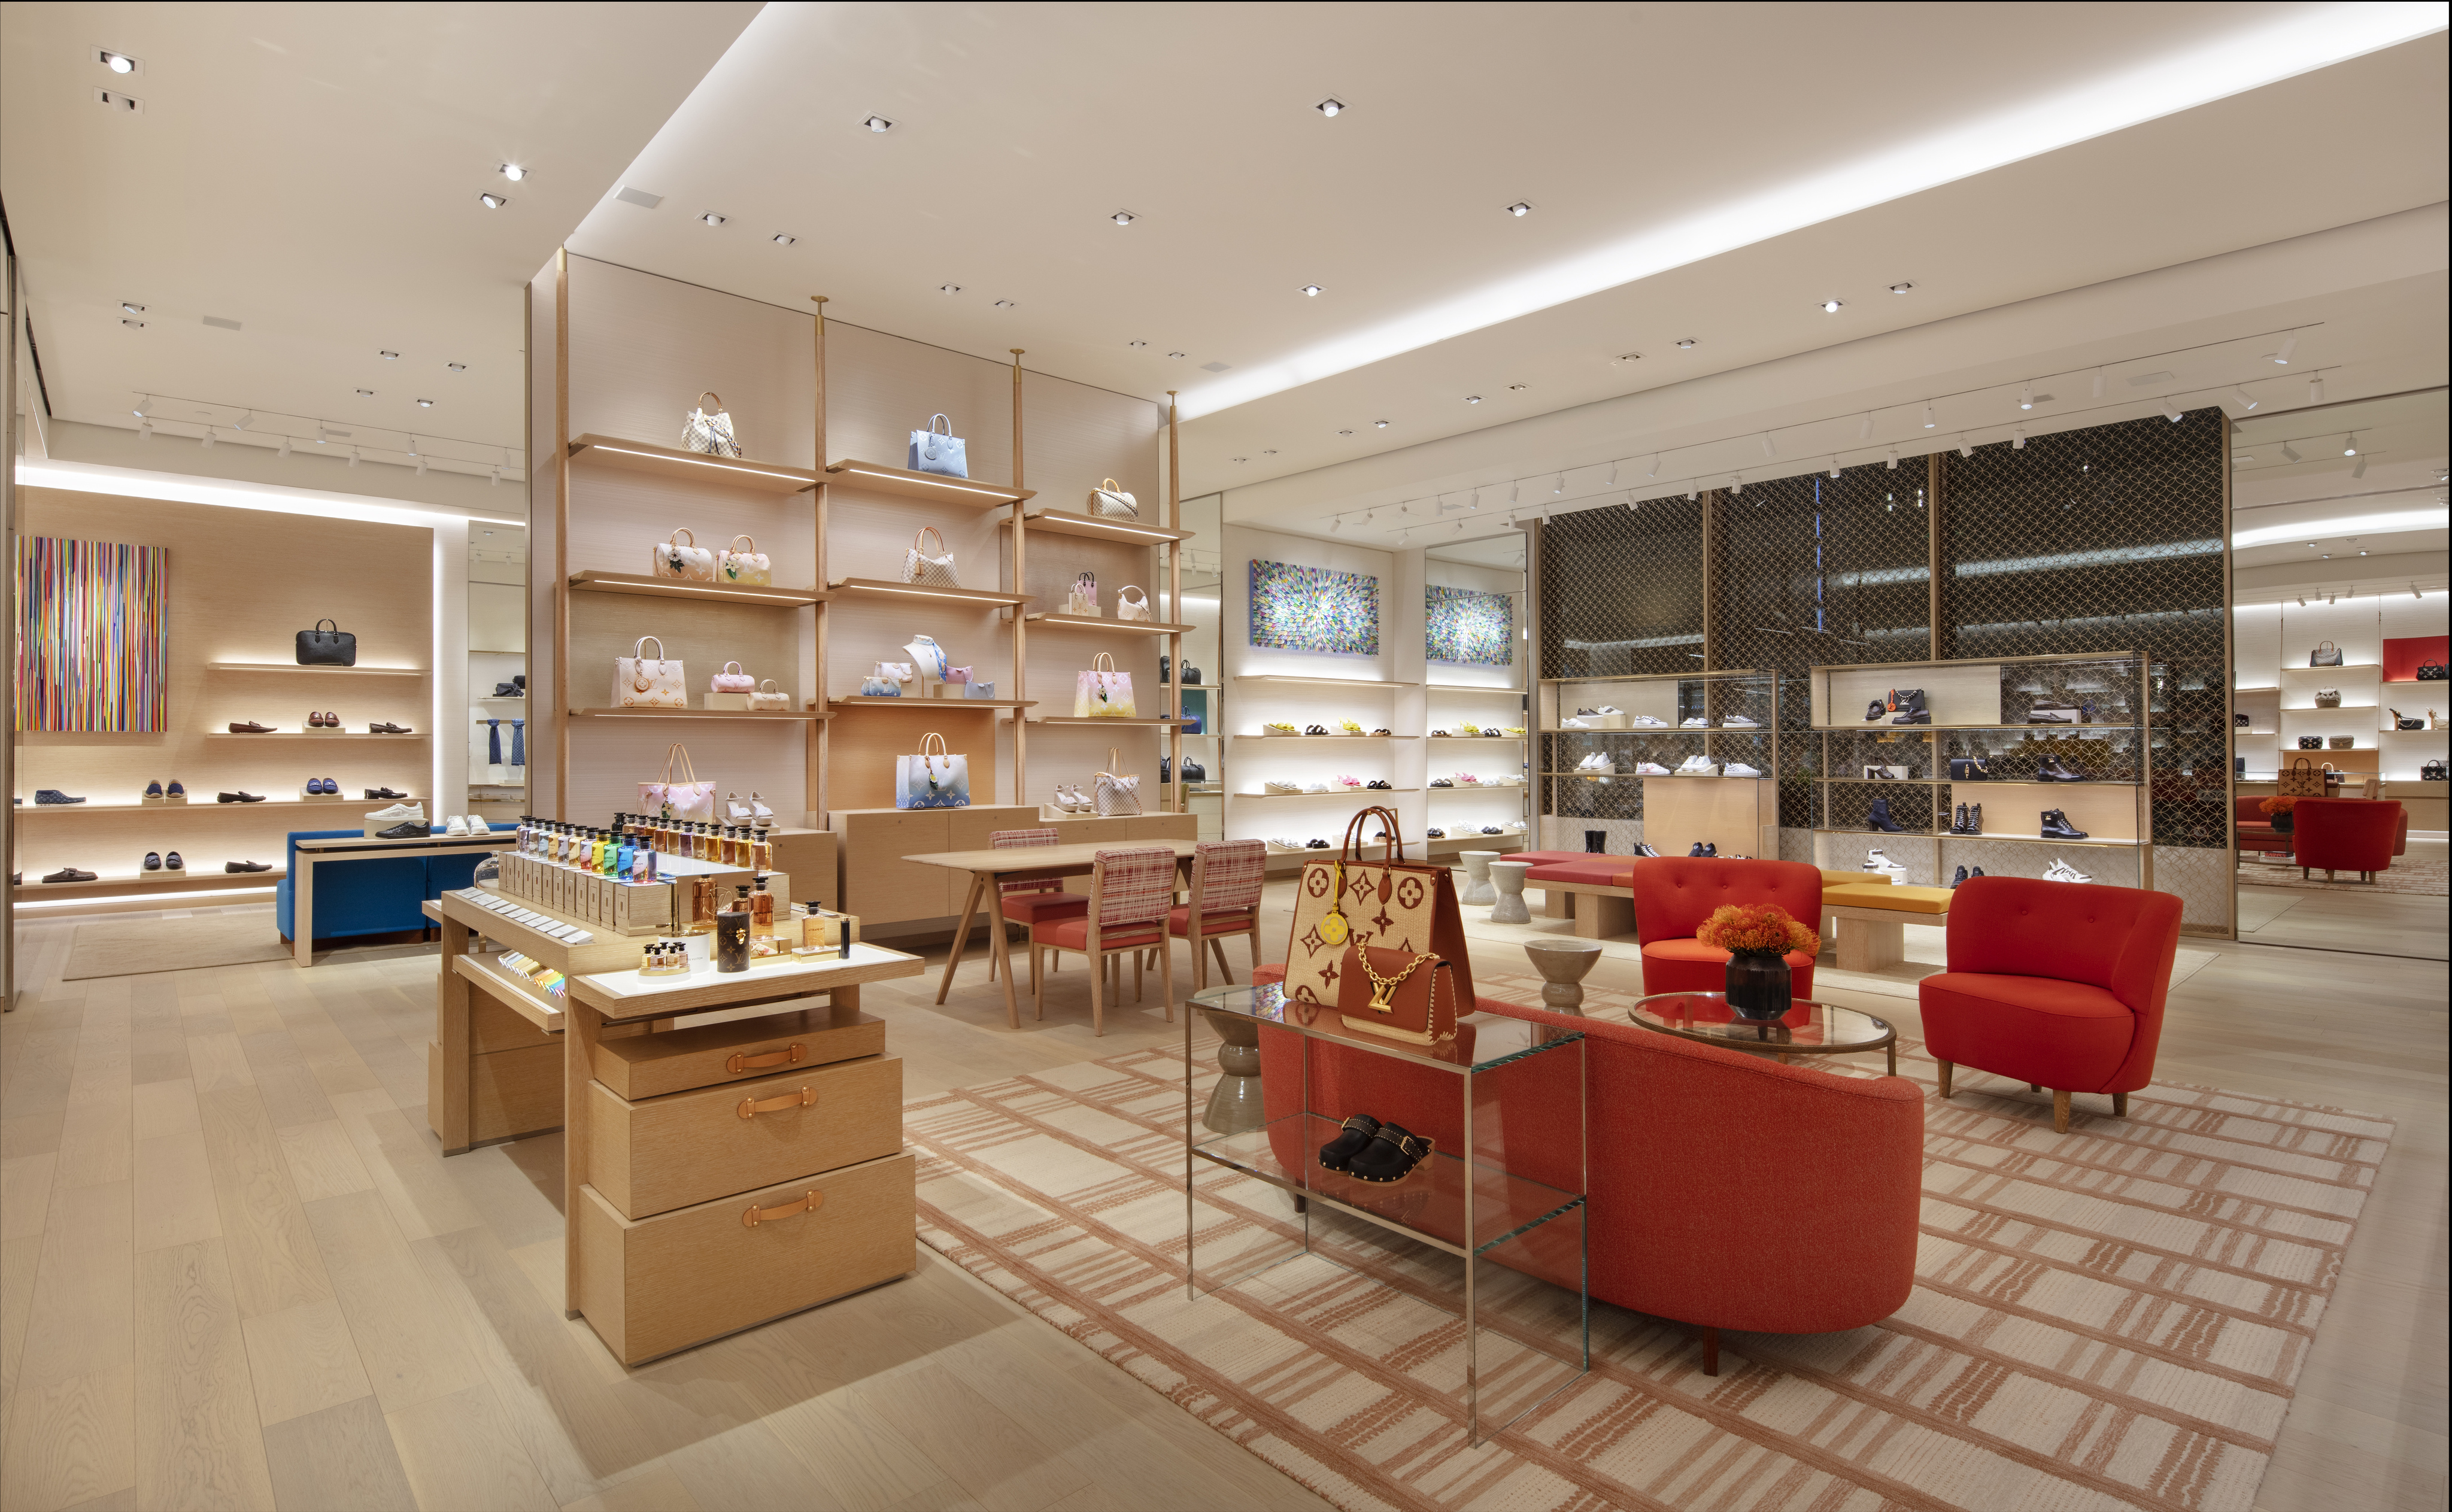 Legacy West's luxury coup continues in Plano with Louis Vuitton and